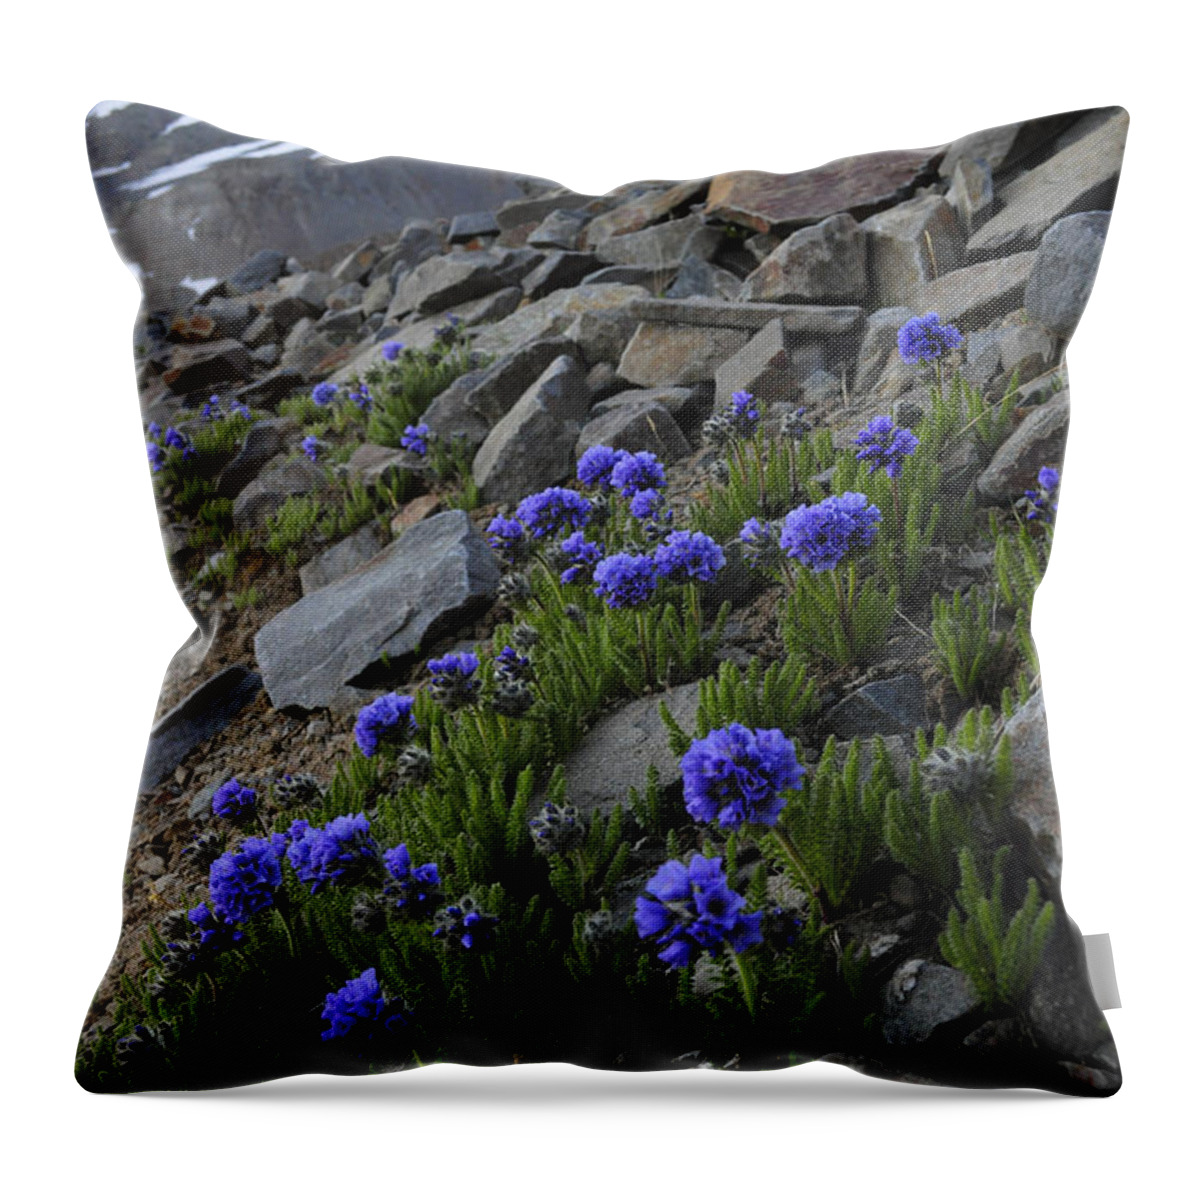 Blue Flowers Throw Pillow featuring the photograph Wilson Peak Wildflowers by Aaron Spong